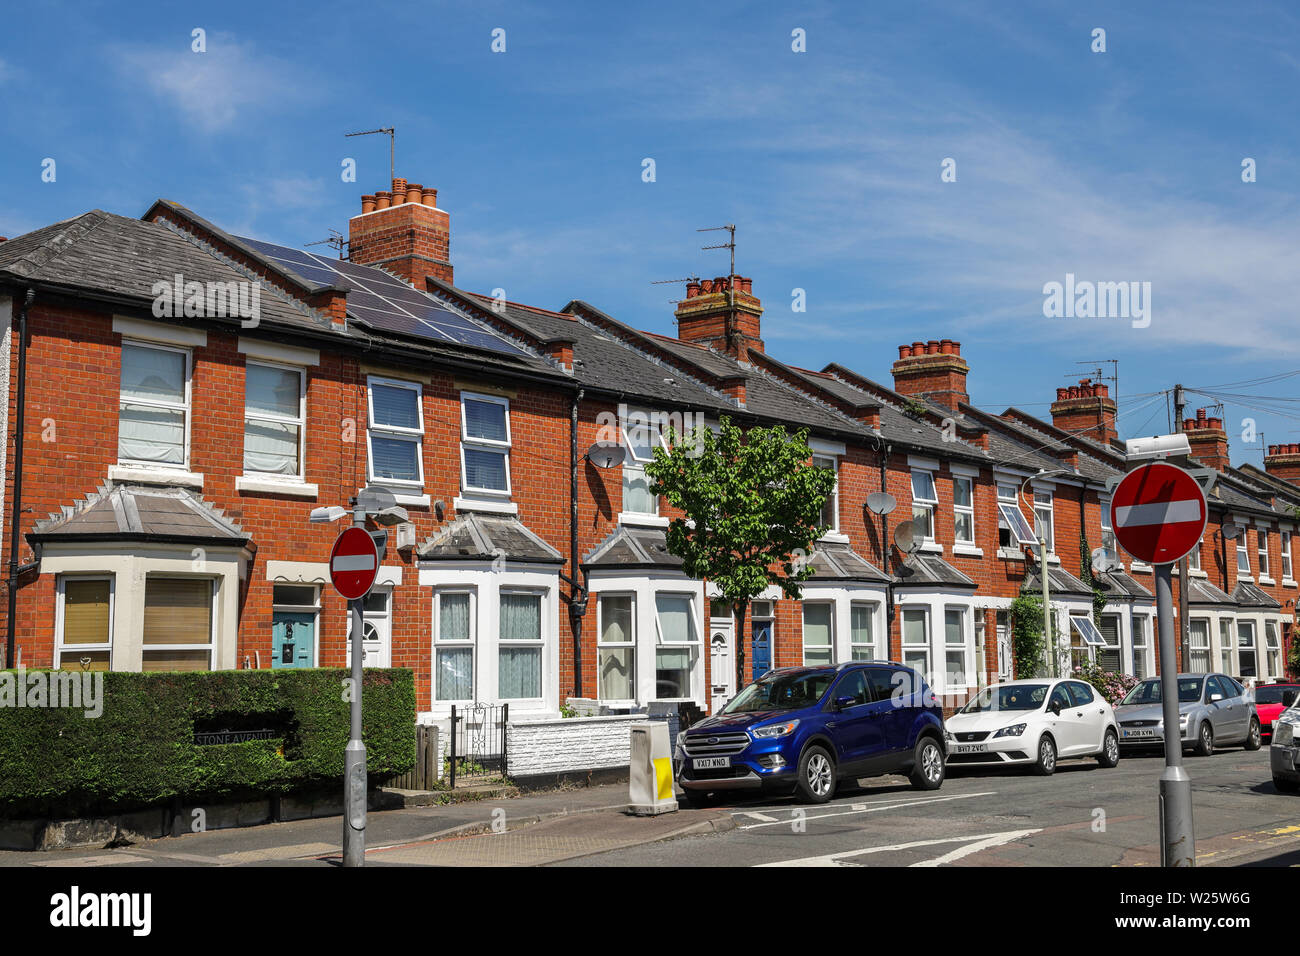 One house with a solar panel in a row of Victorian terraced houses in Cheltenham UK Stock Photo